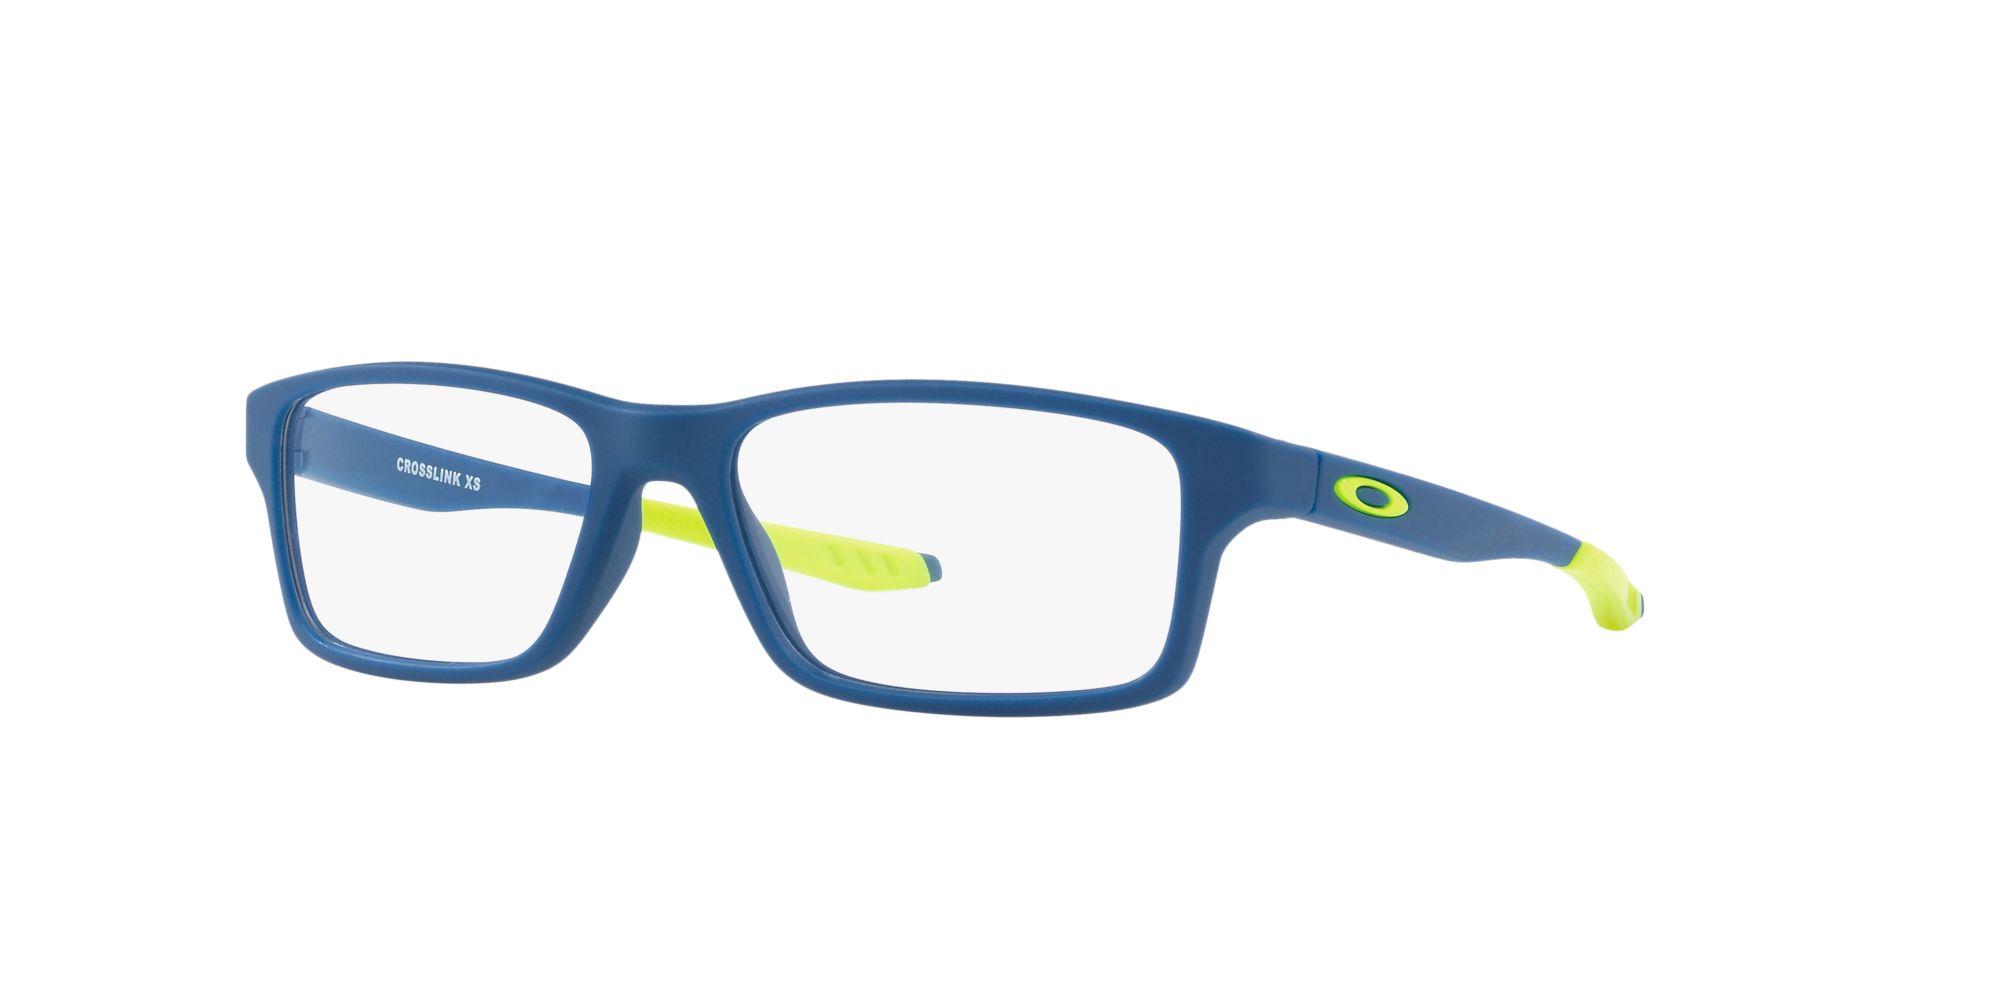 Oakley 0OY8002 in Blue Glasses | OPSM